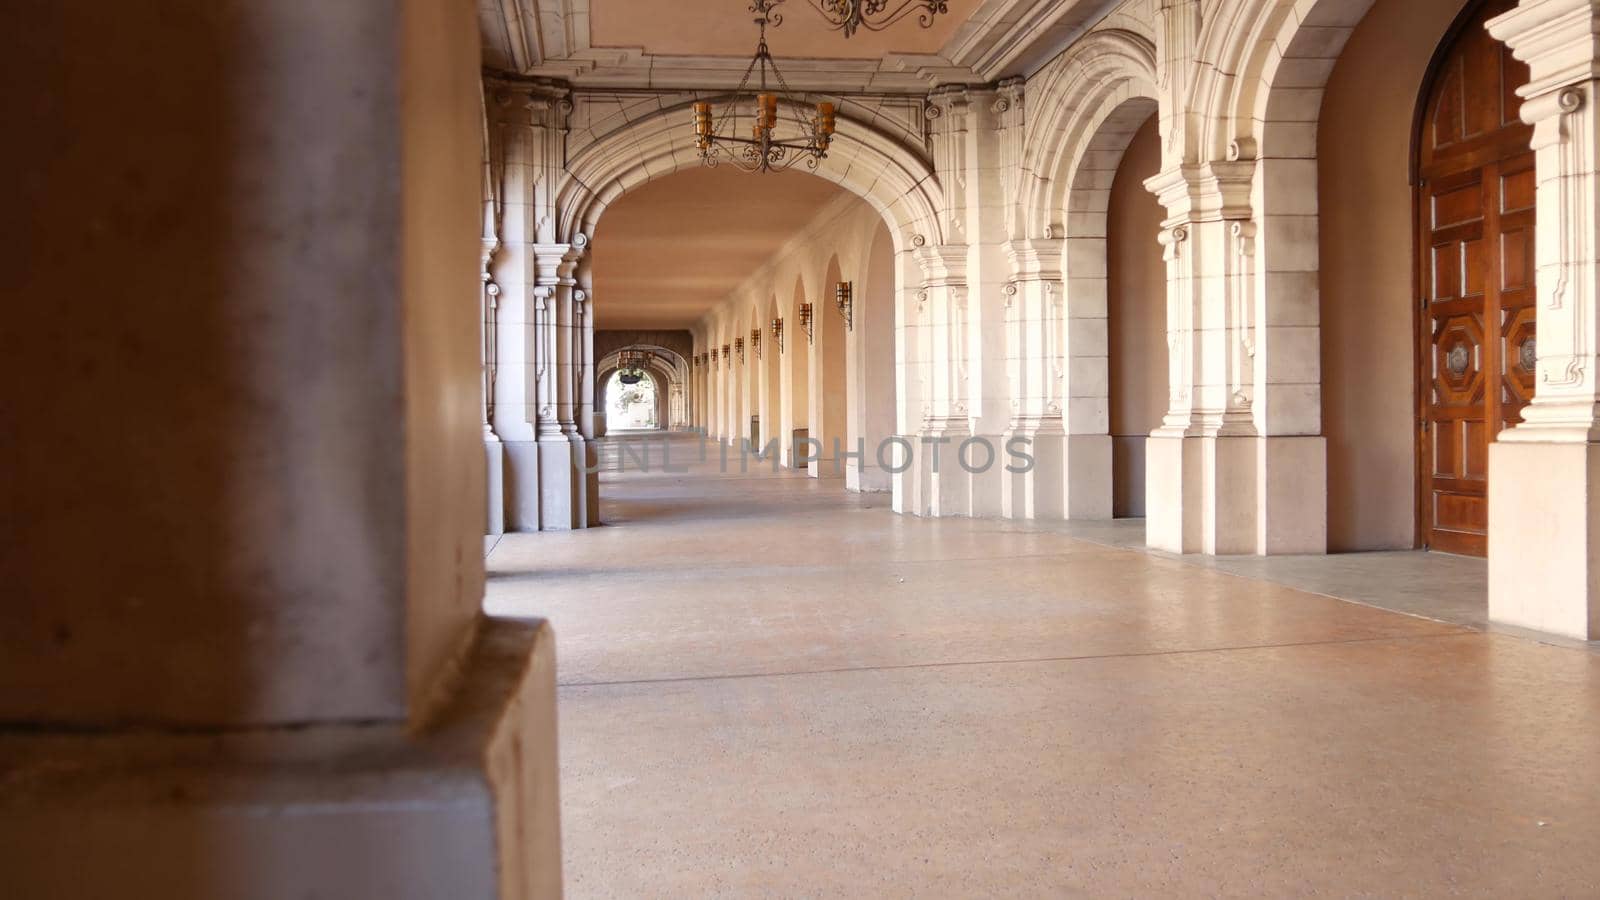 Spanish colonial revival architecture, Balboa Park, San Diego, California USA. Historic building, classic baroque or rococo romance style. Arches and columns of Casa, archway, vault, arcade or passage